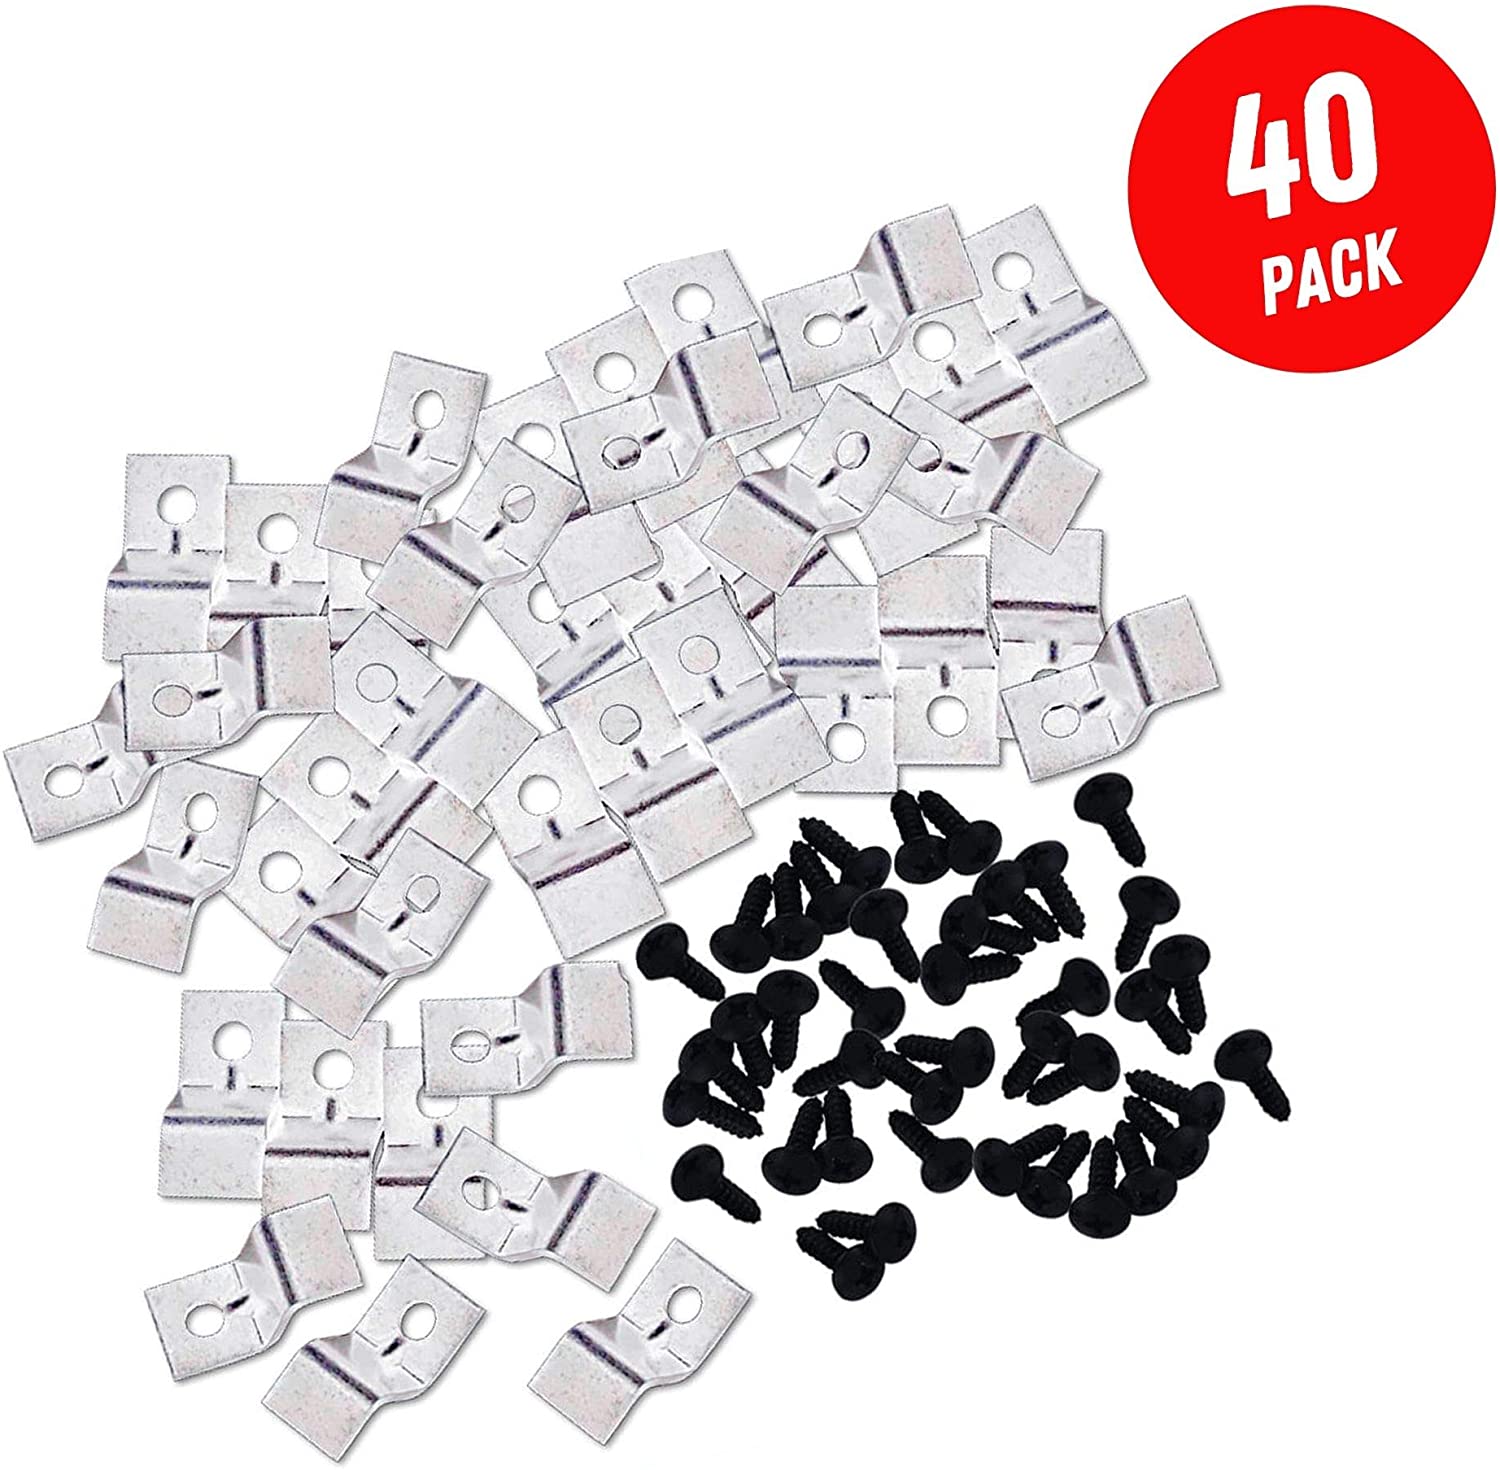 40 Pack Heavy Duty Z Table Top Fasteners with Screws